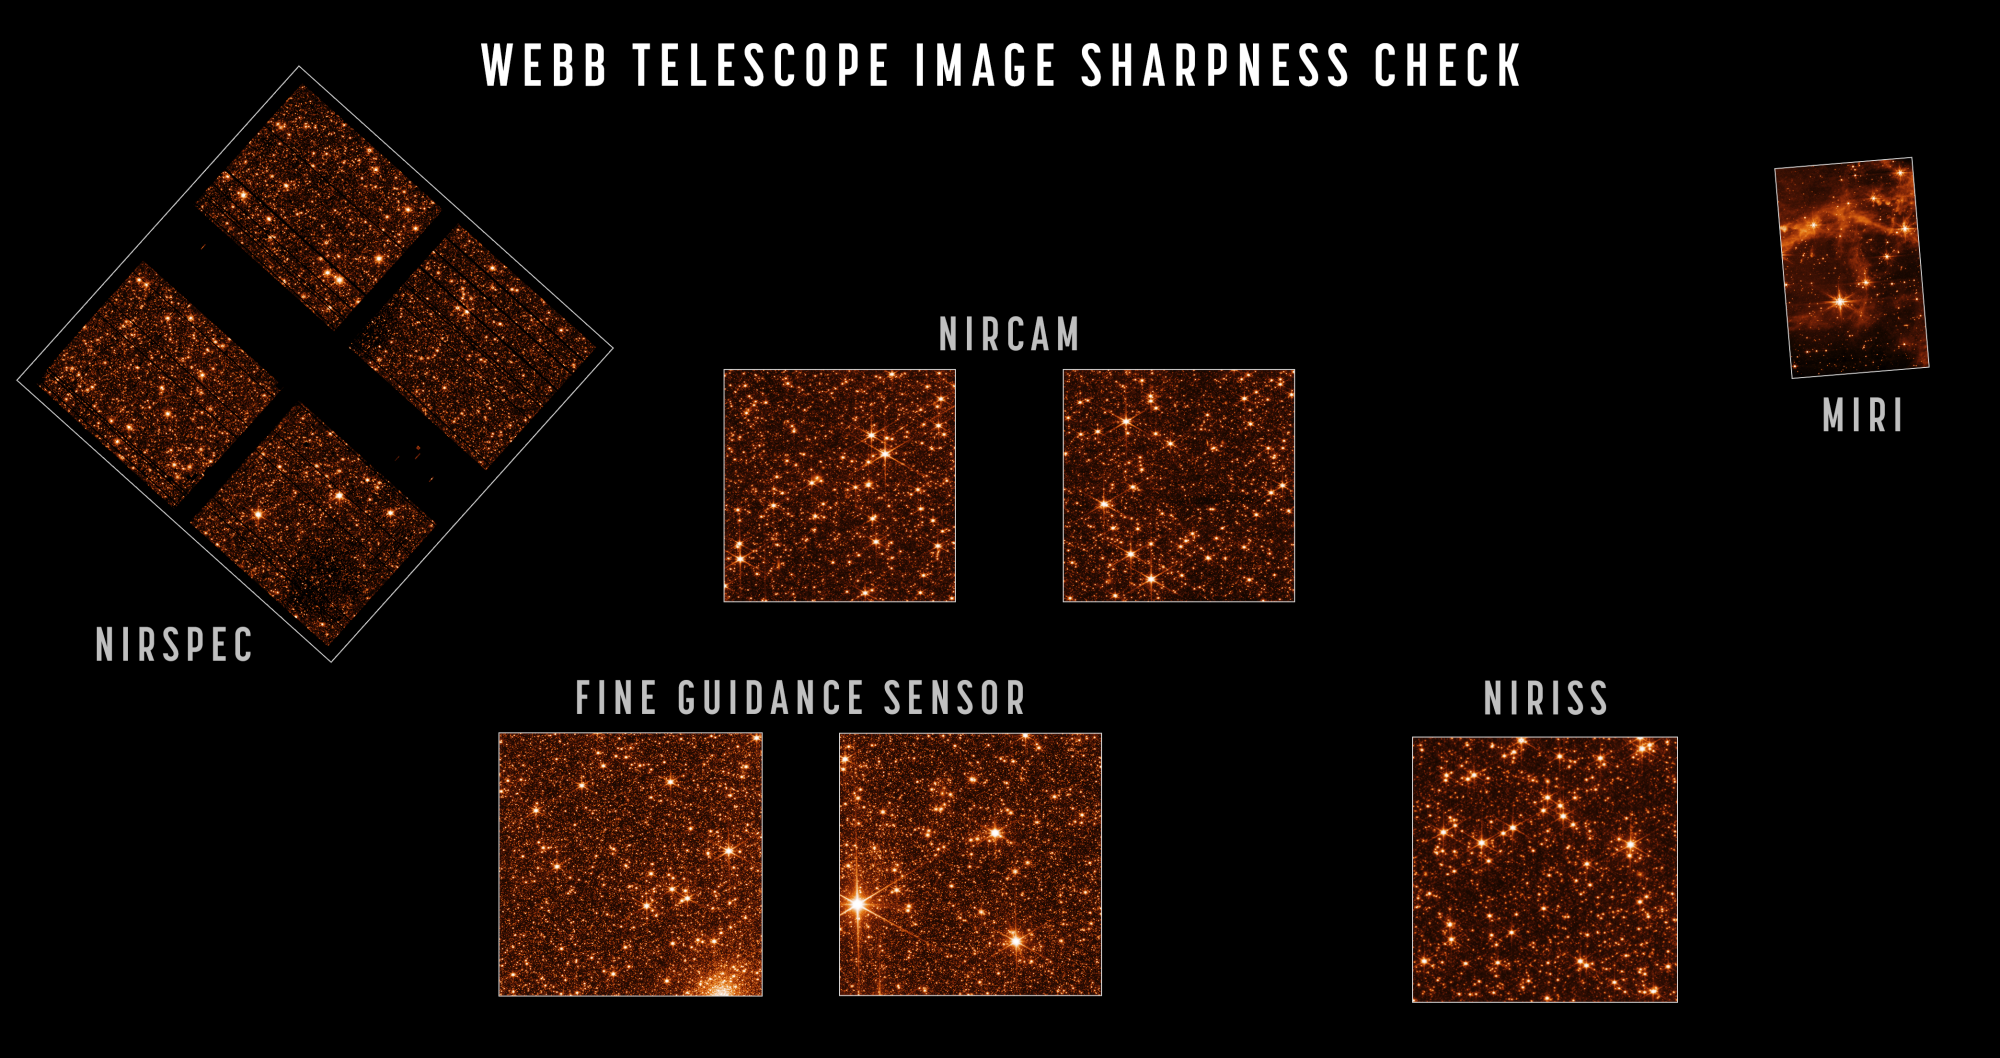 James Webb Space Telescope photographs proving instruments are fully in focus